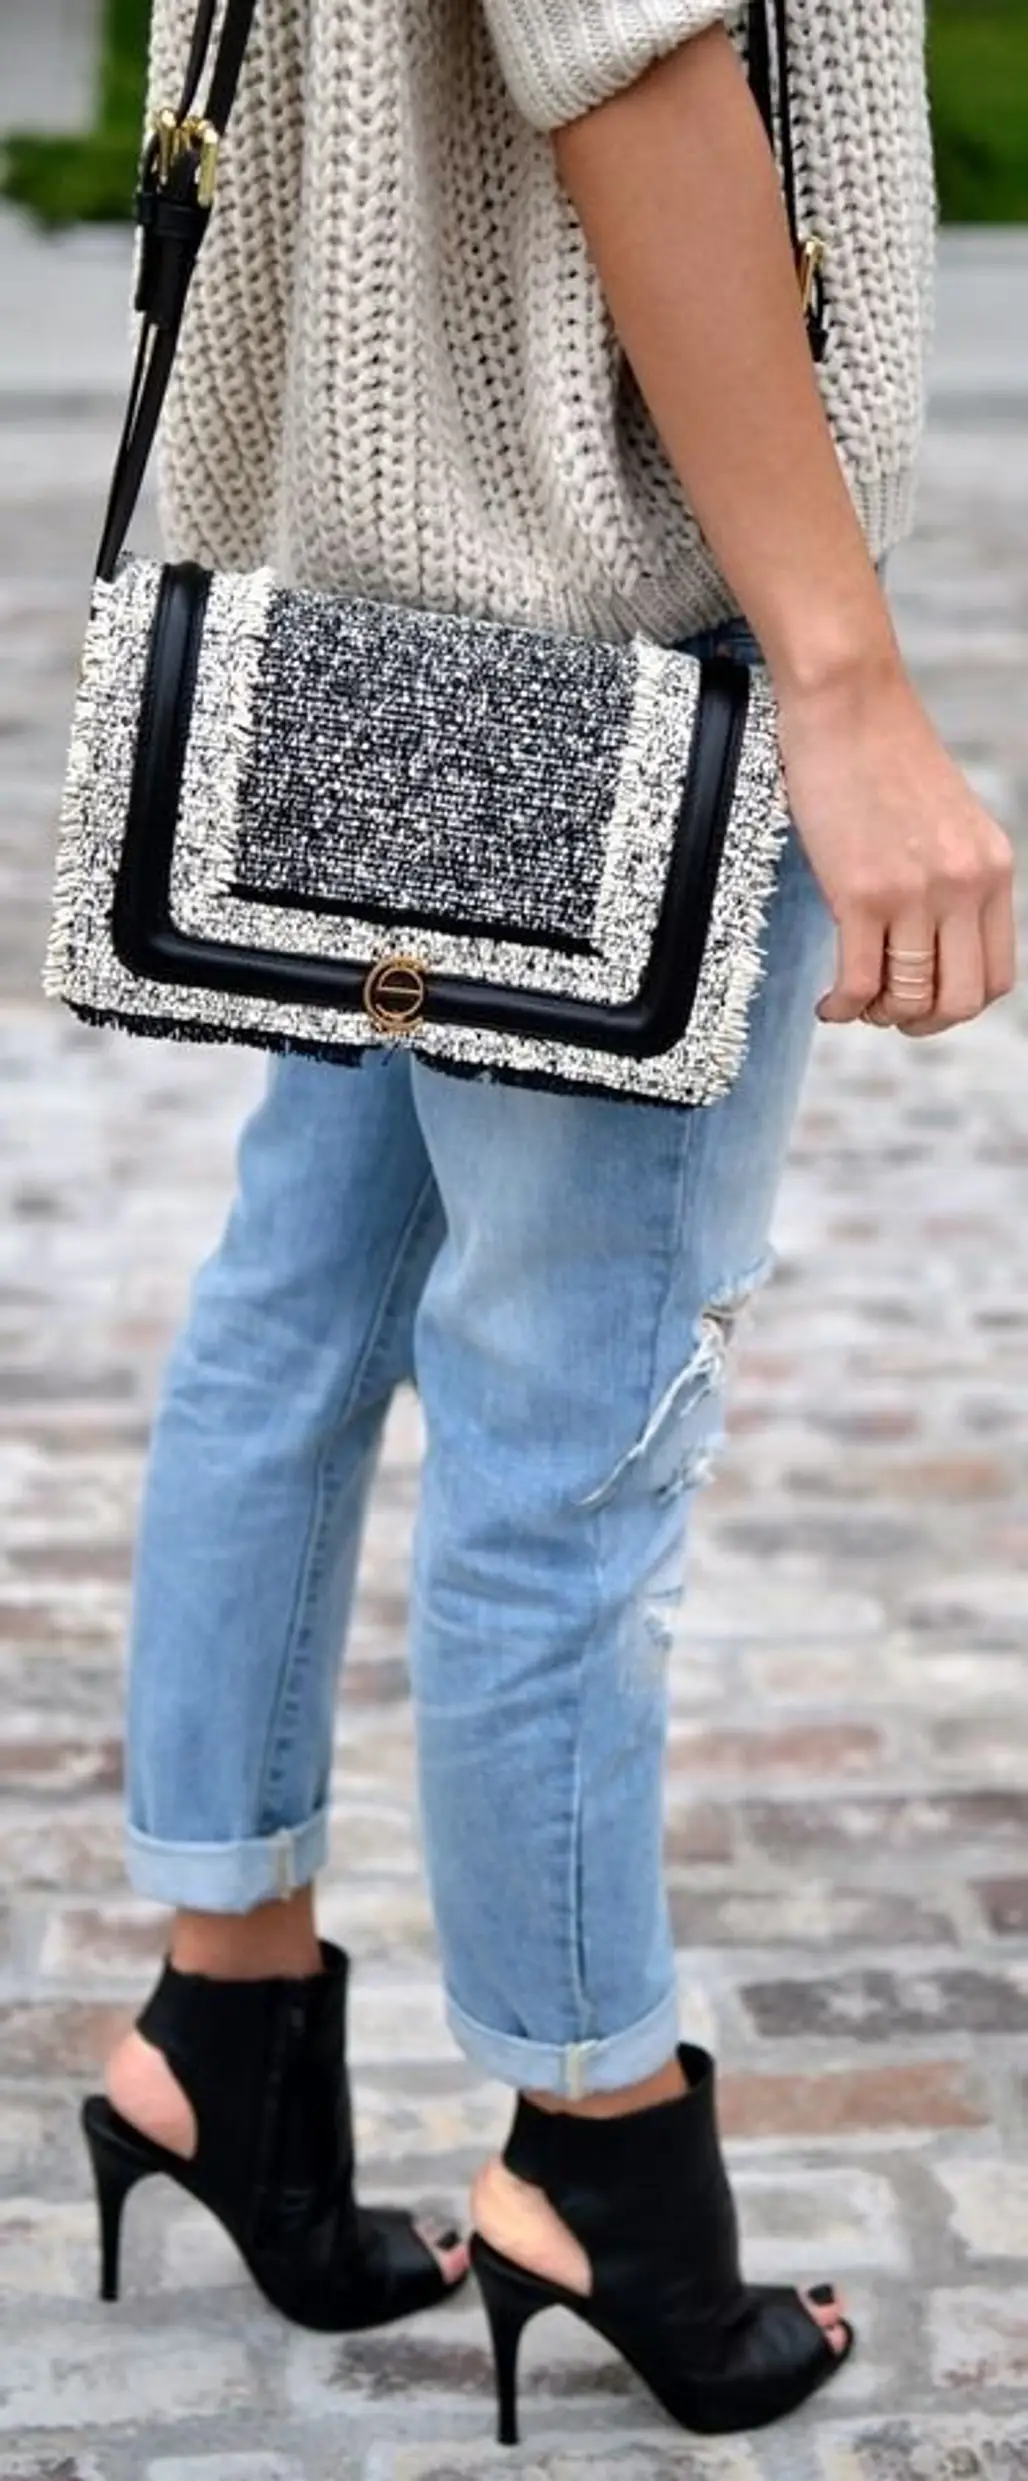 With a Chunky Sweater & Statement Bag